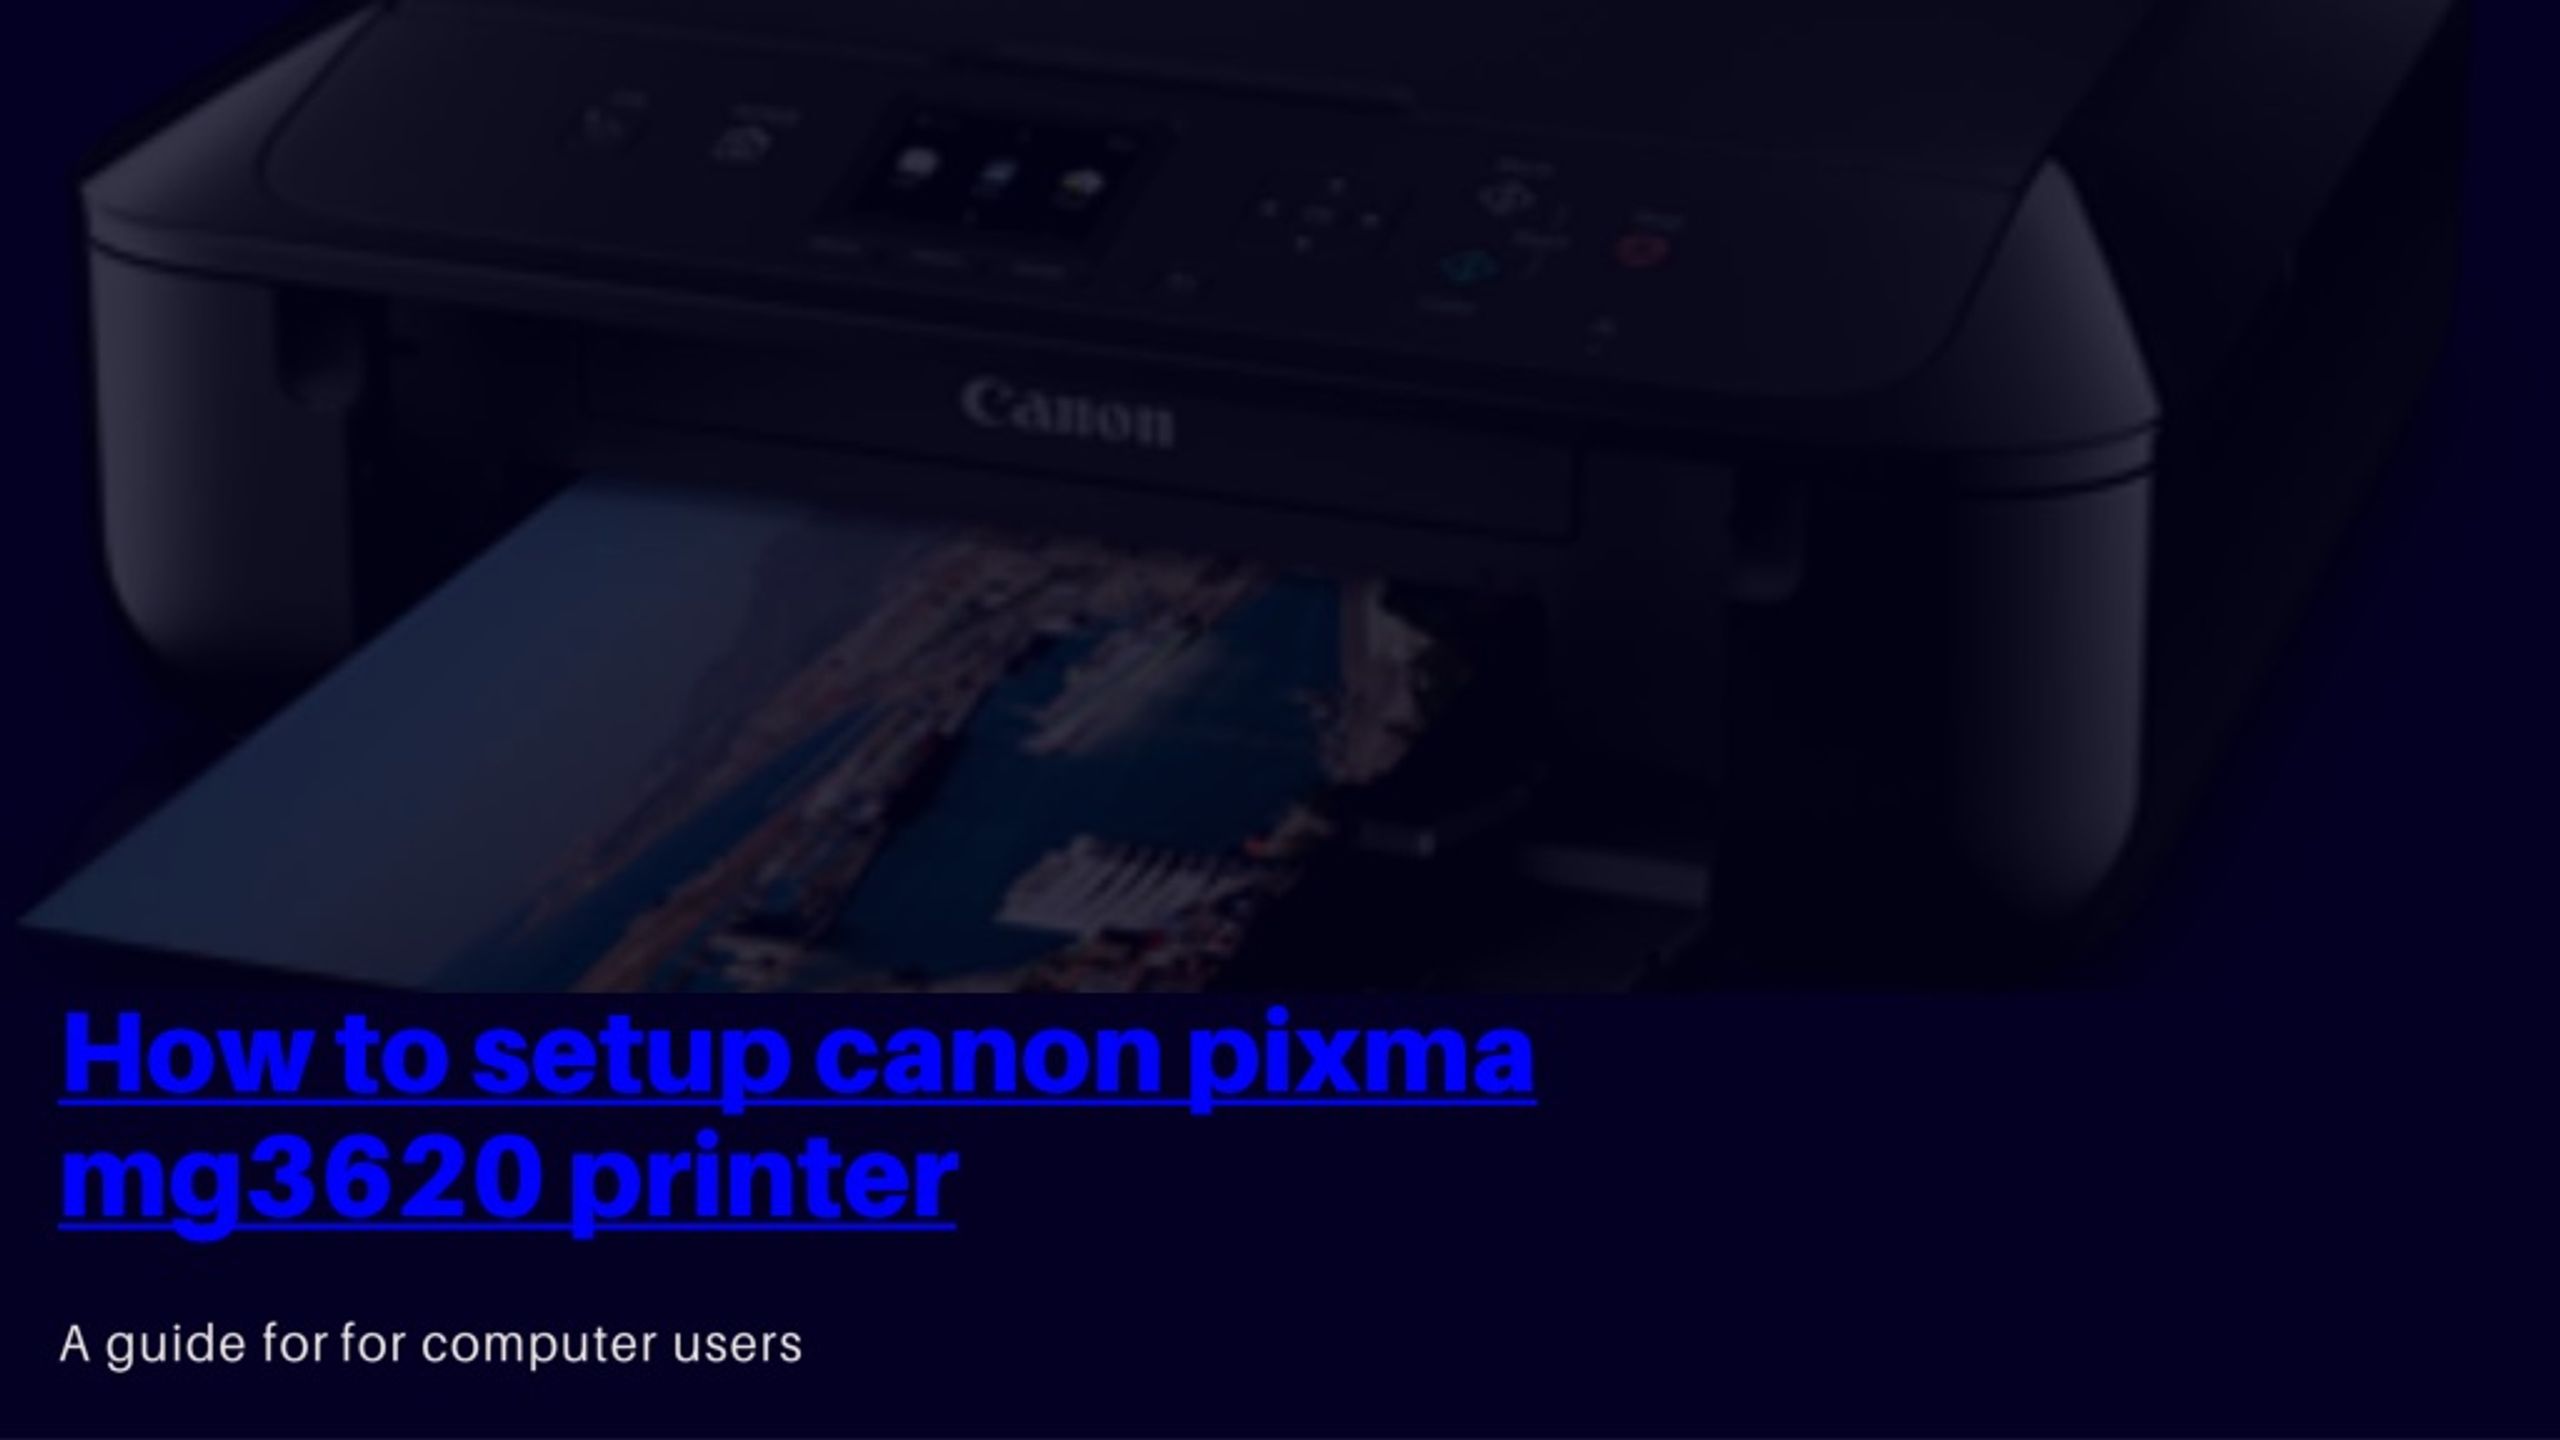 Ppt How To Setup Canon Pixma Mg3620 Printer Powerpoint Presentation Free Download Id8244683 0524